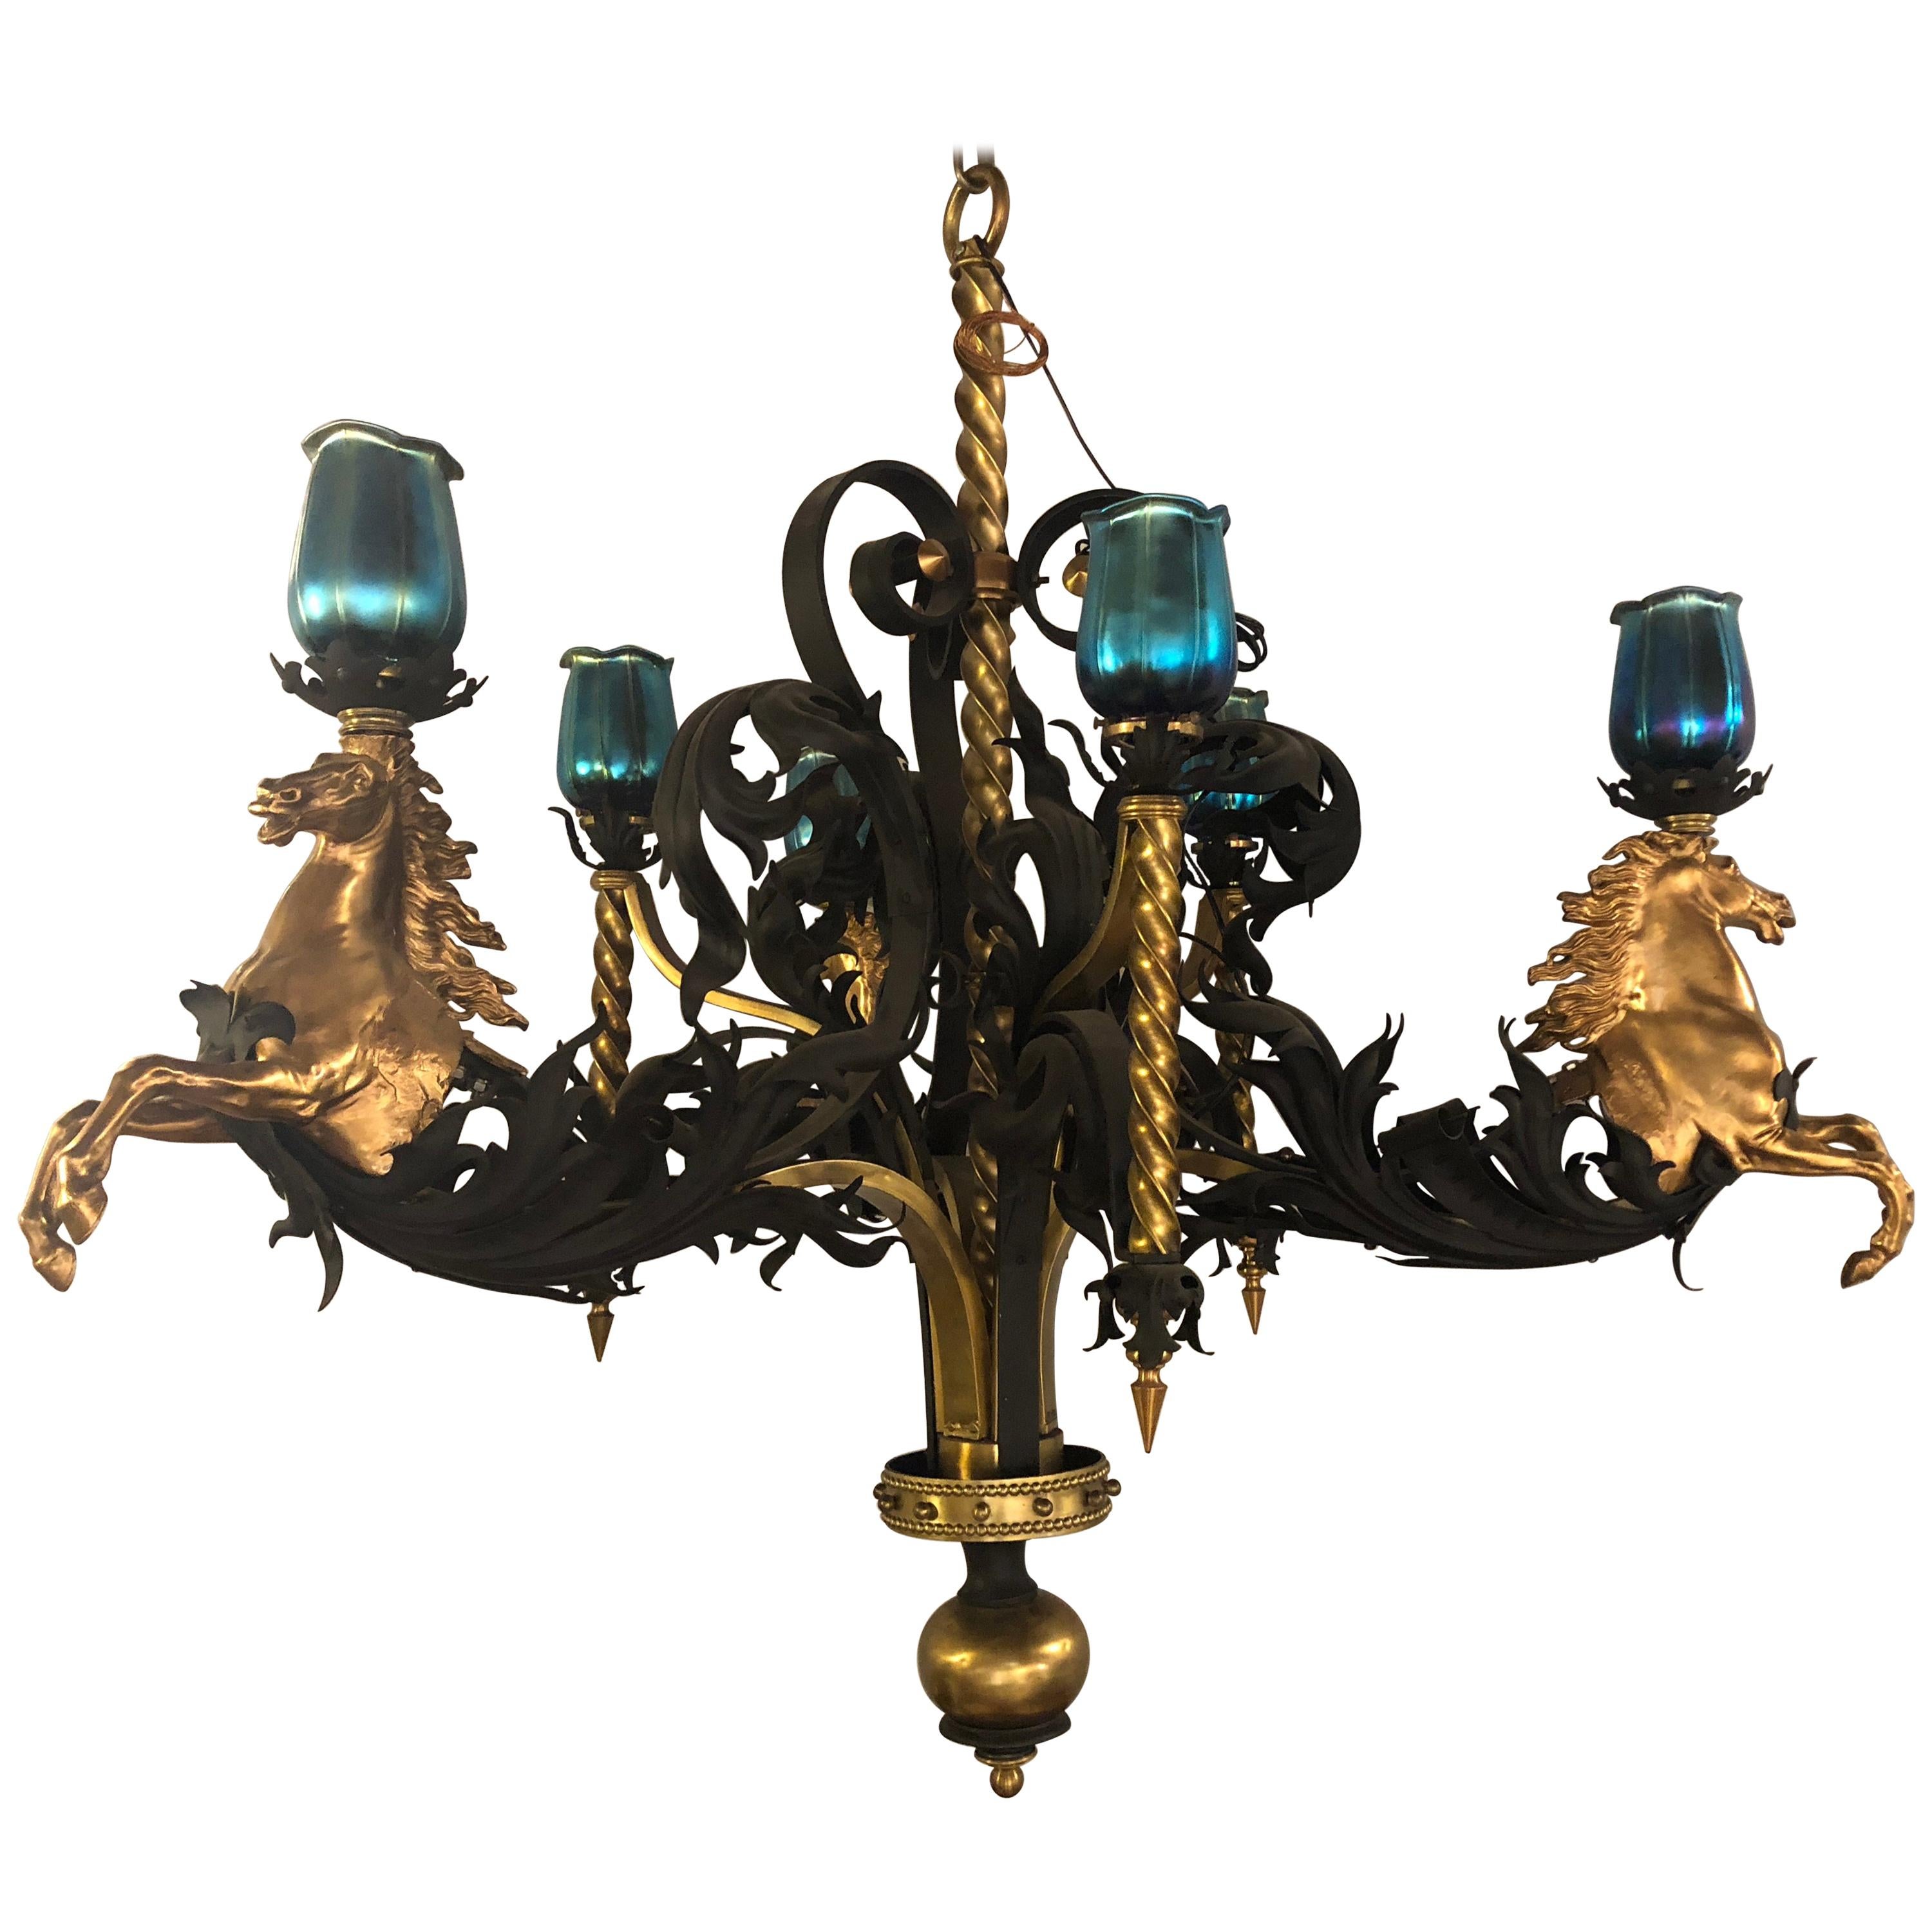 Bronze and Wrought Iron Palatial Stallions Chandelier with Quezal Style Shades